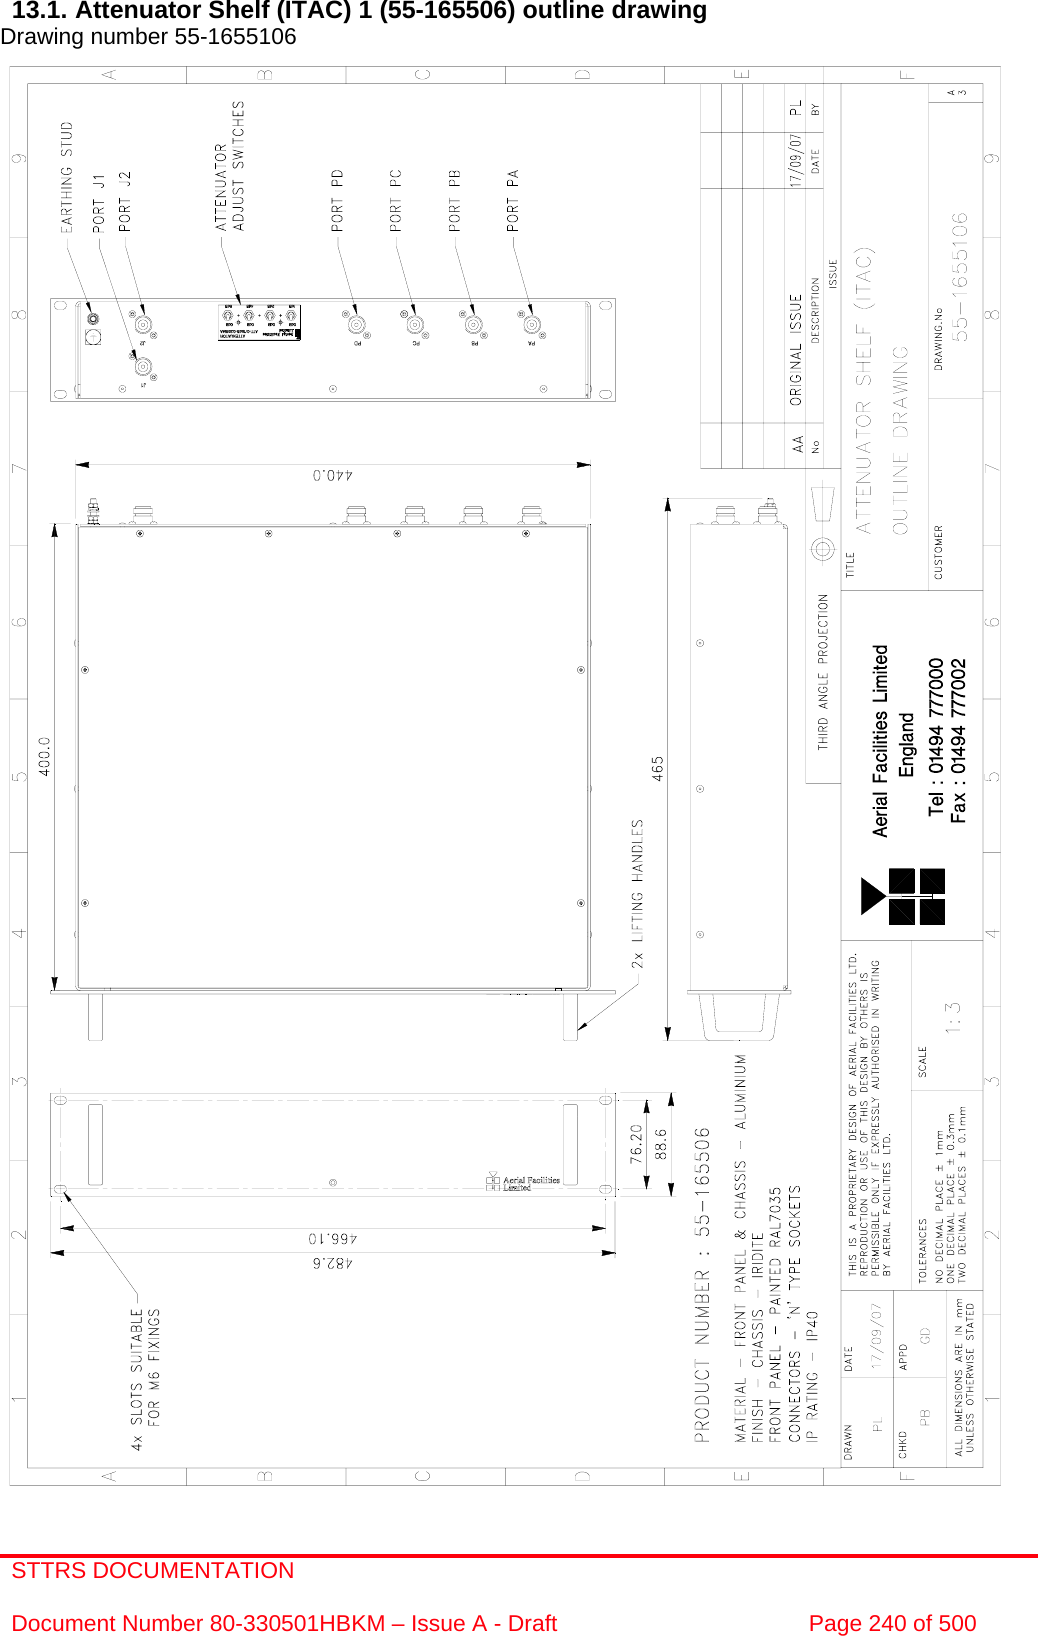 STTRS DOCUMENTATION  Document Number 80-330501HBKM – Issue A - Draft  Page 240 of 500   13.1. Attenuator Shelf (ITAC) 1 (55-165506) outline drawing  Drawing number 55-1655106                                                     